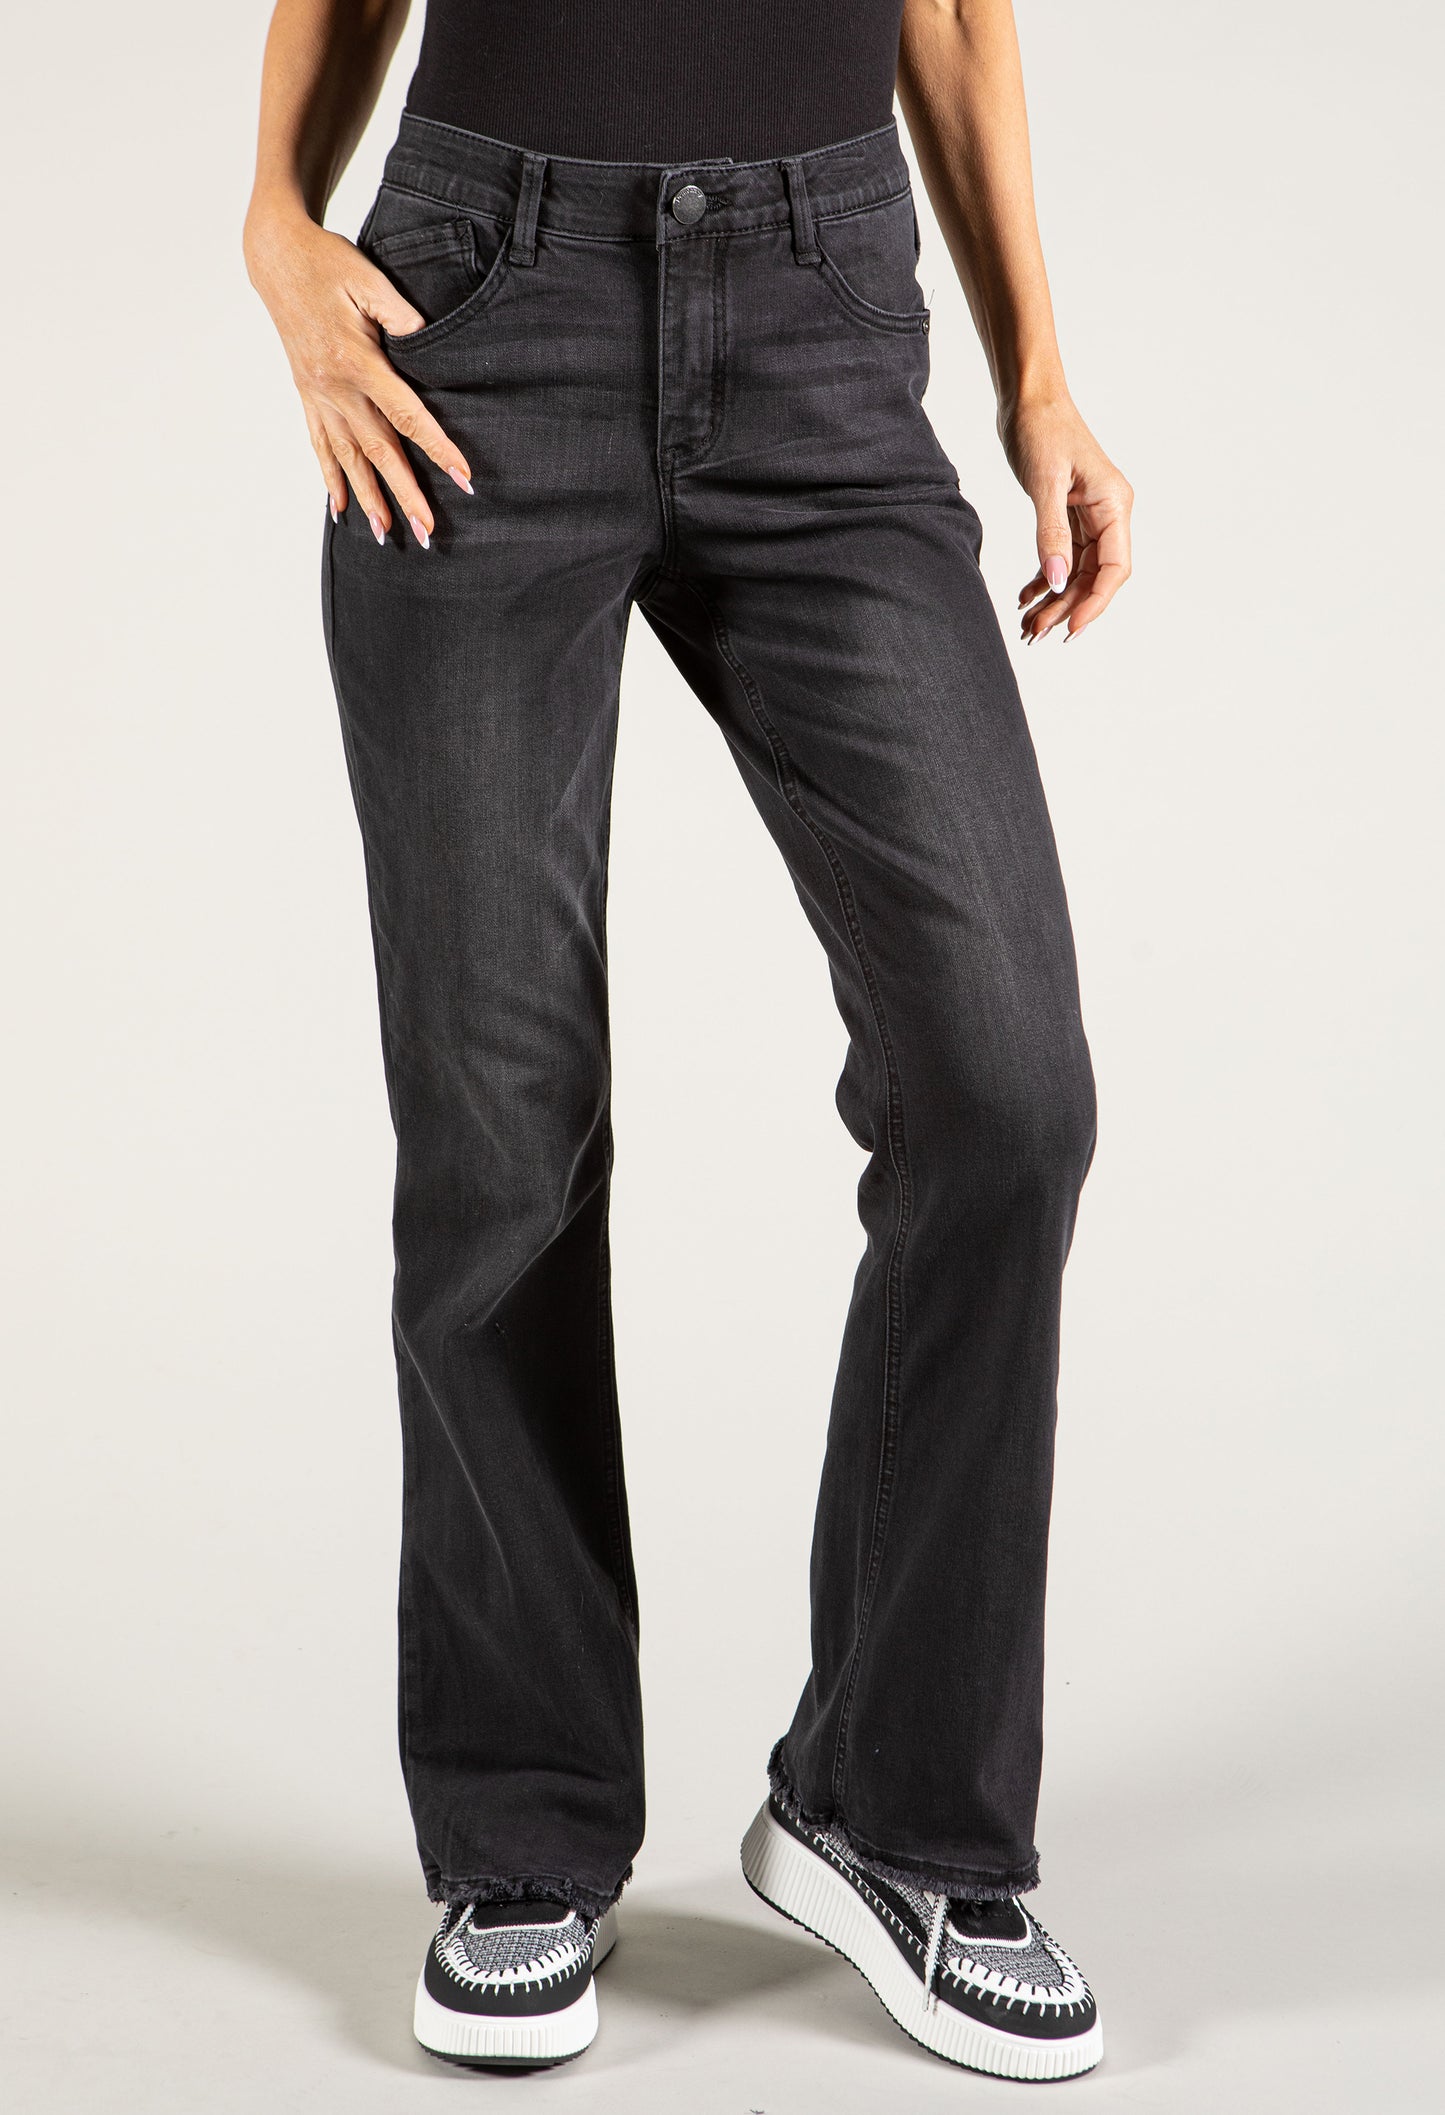 "Ab" Solution High Rise Itty Bitty More Boot Jean